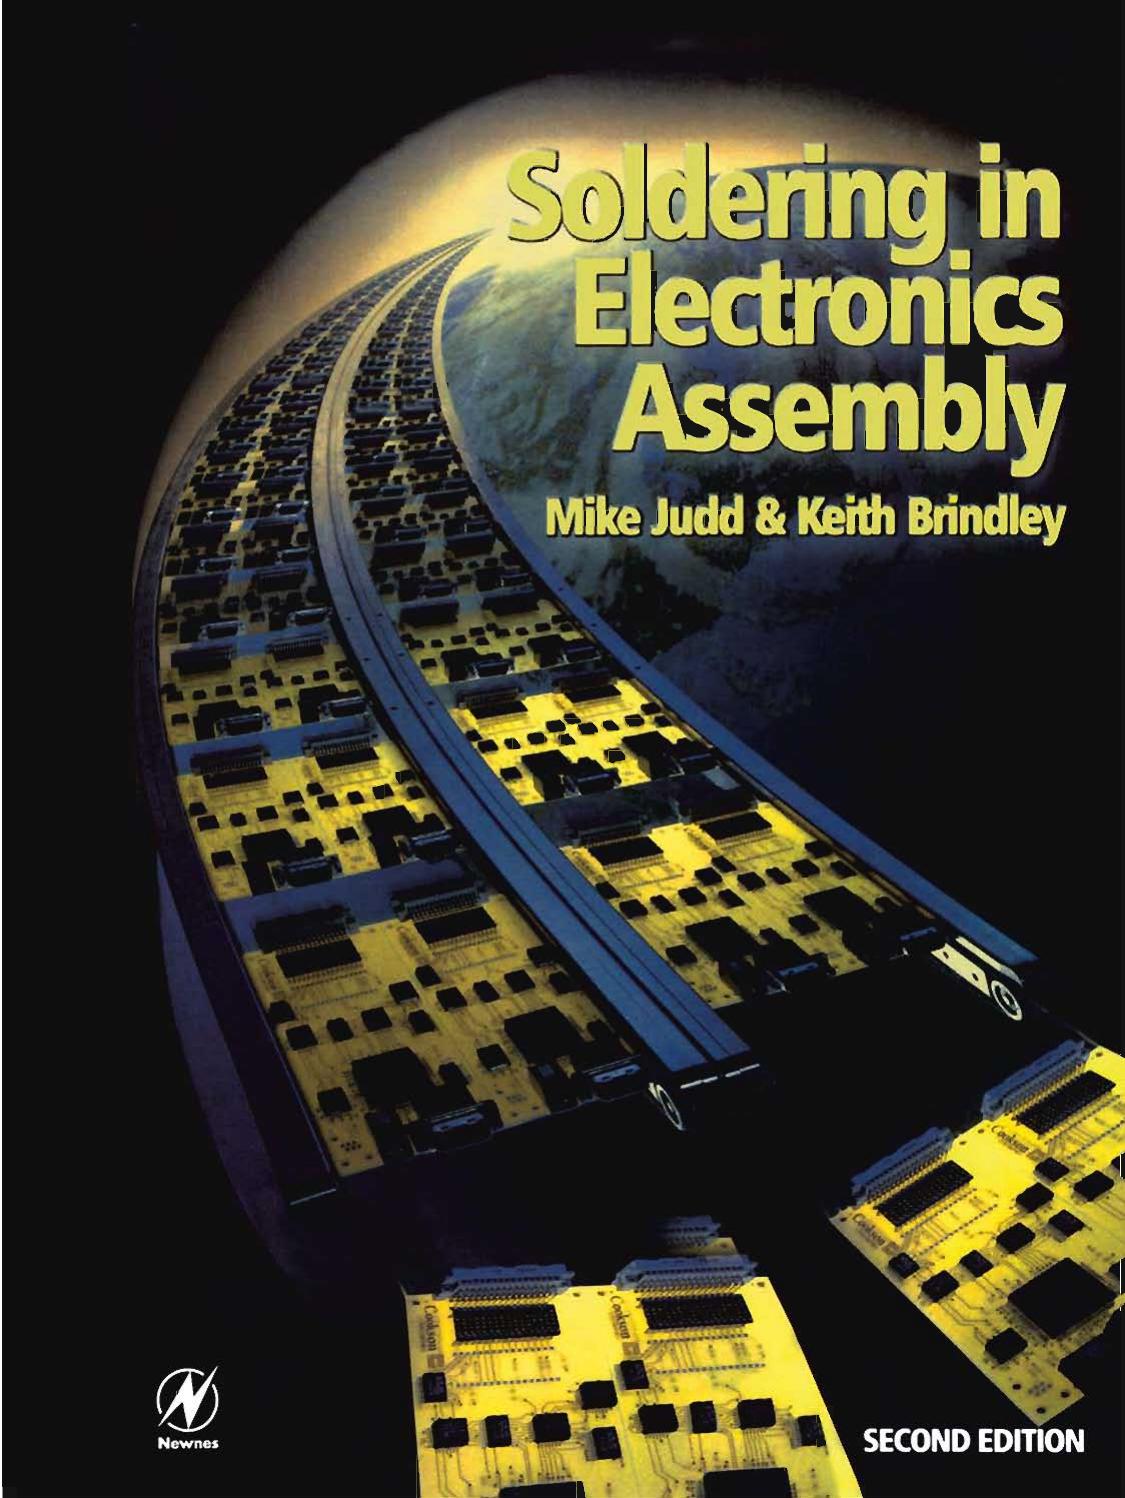 MIKE JUDD, Keith Brindley by Soldering in electronics assembly-Newnes (1999)